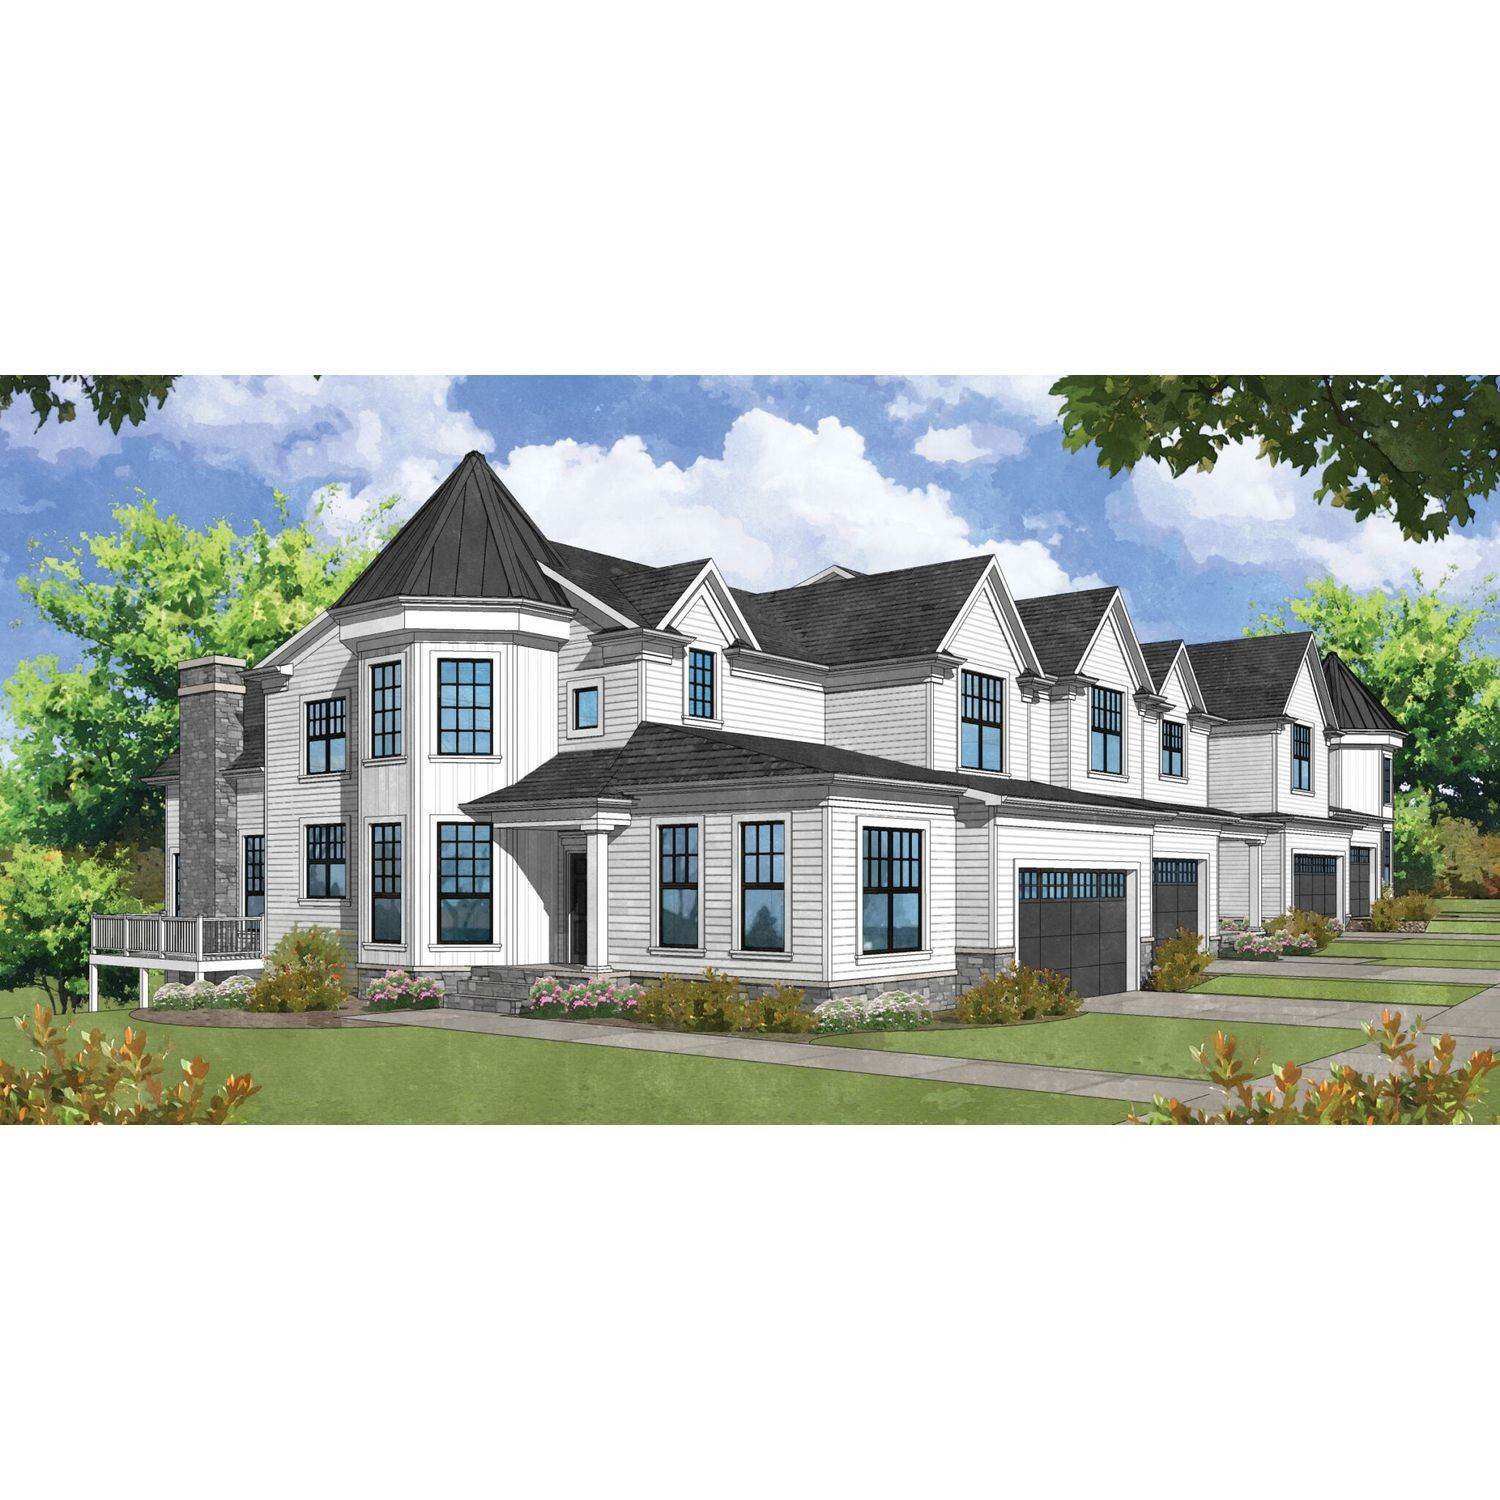 Single Family for Sale at Mountainside, NJ 07092